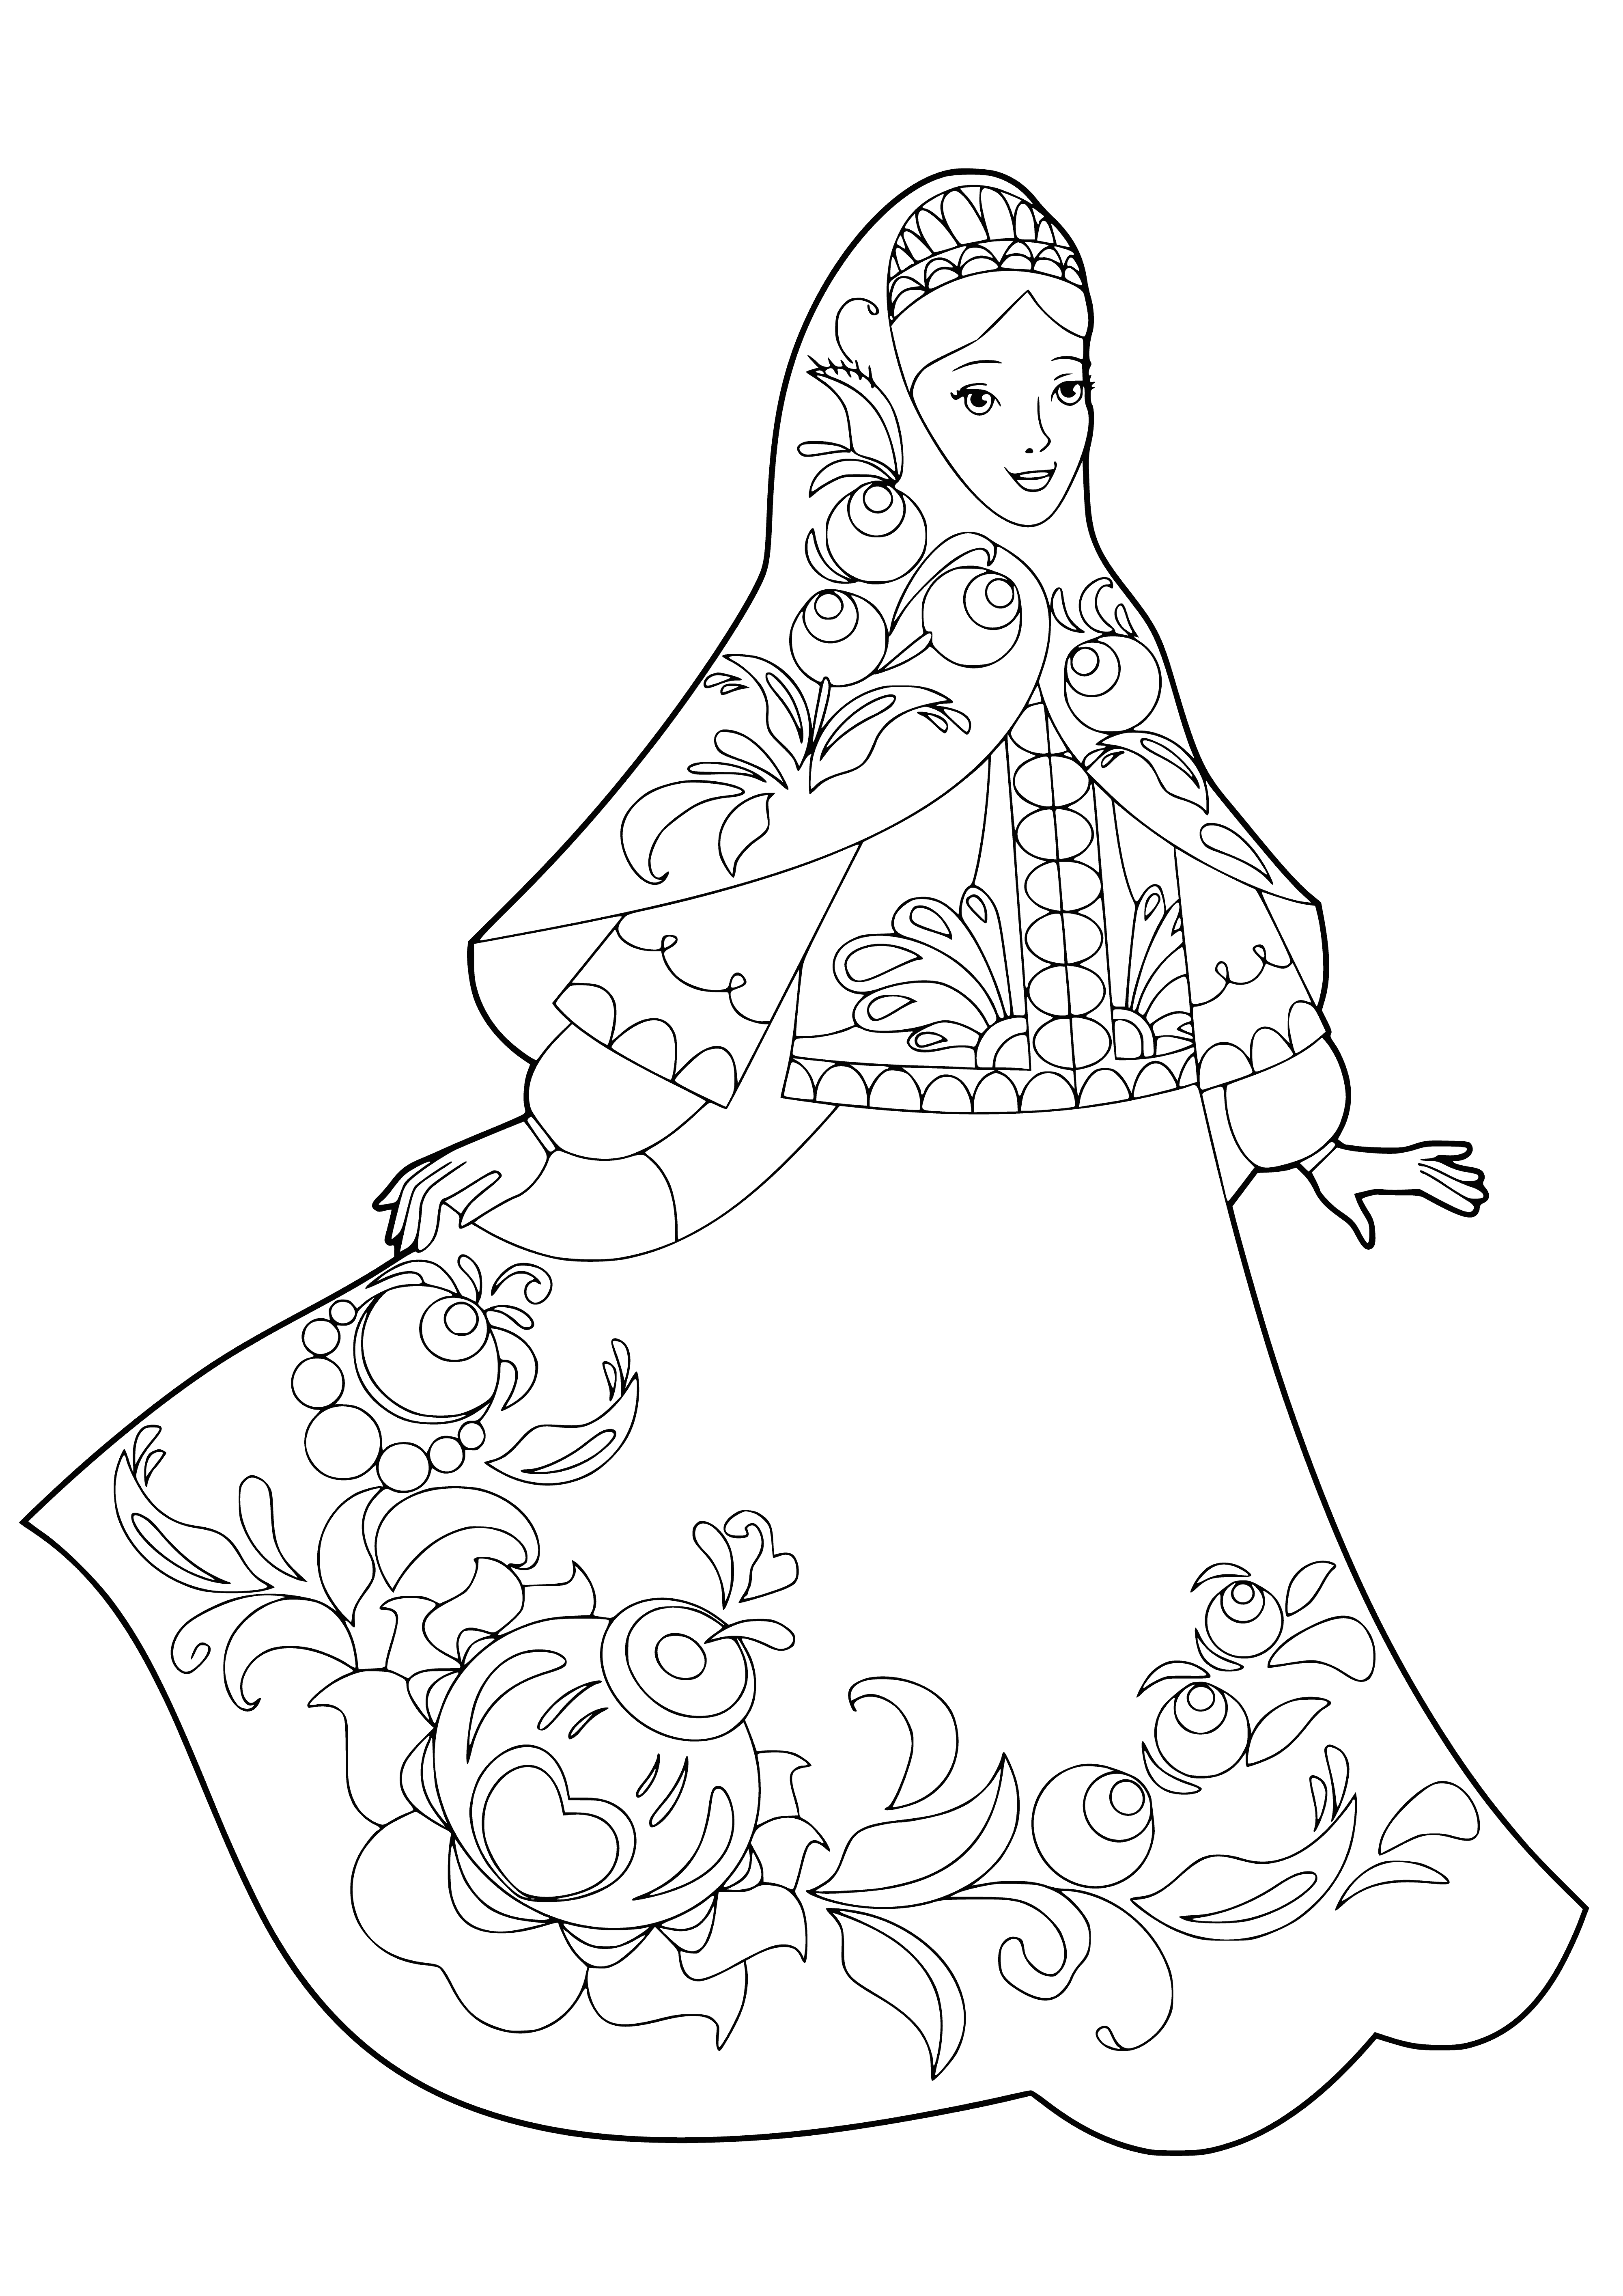 coloring page: Russian beauties in colorful dresses, with long hair, pale skin, and blue or green eyes, enjoying the adoration of those around them.